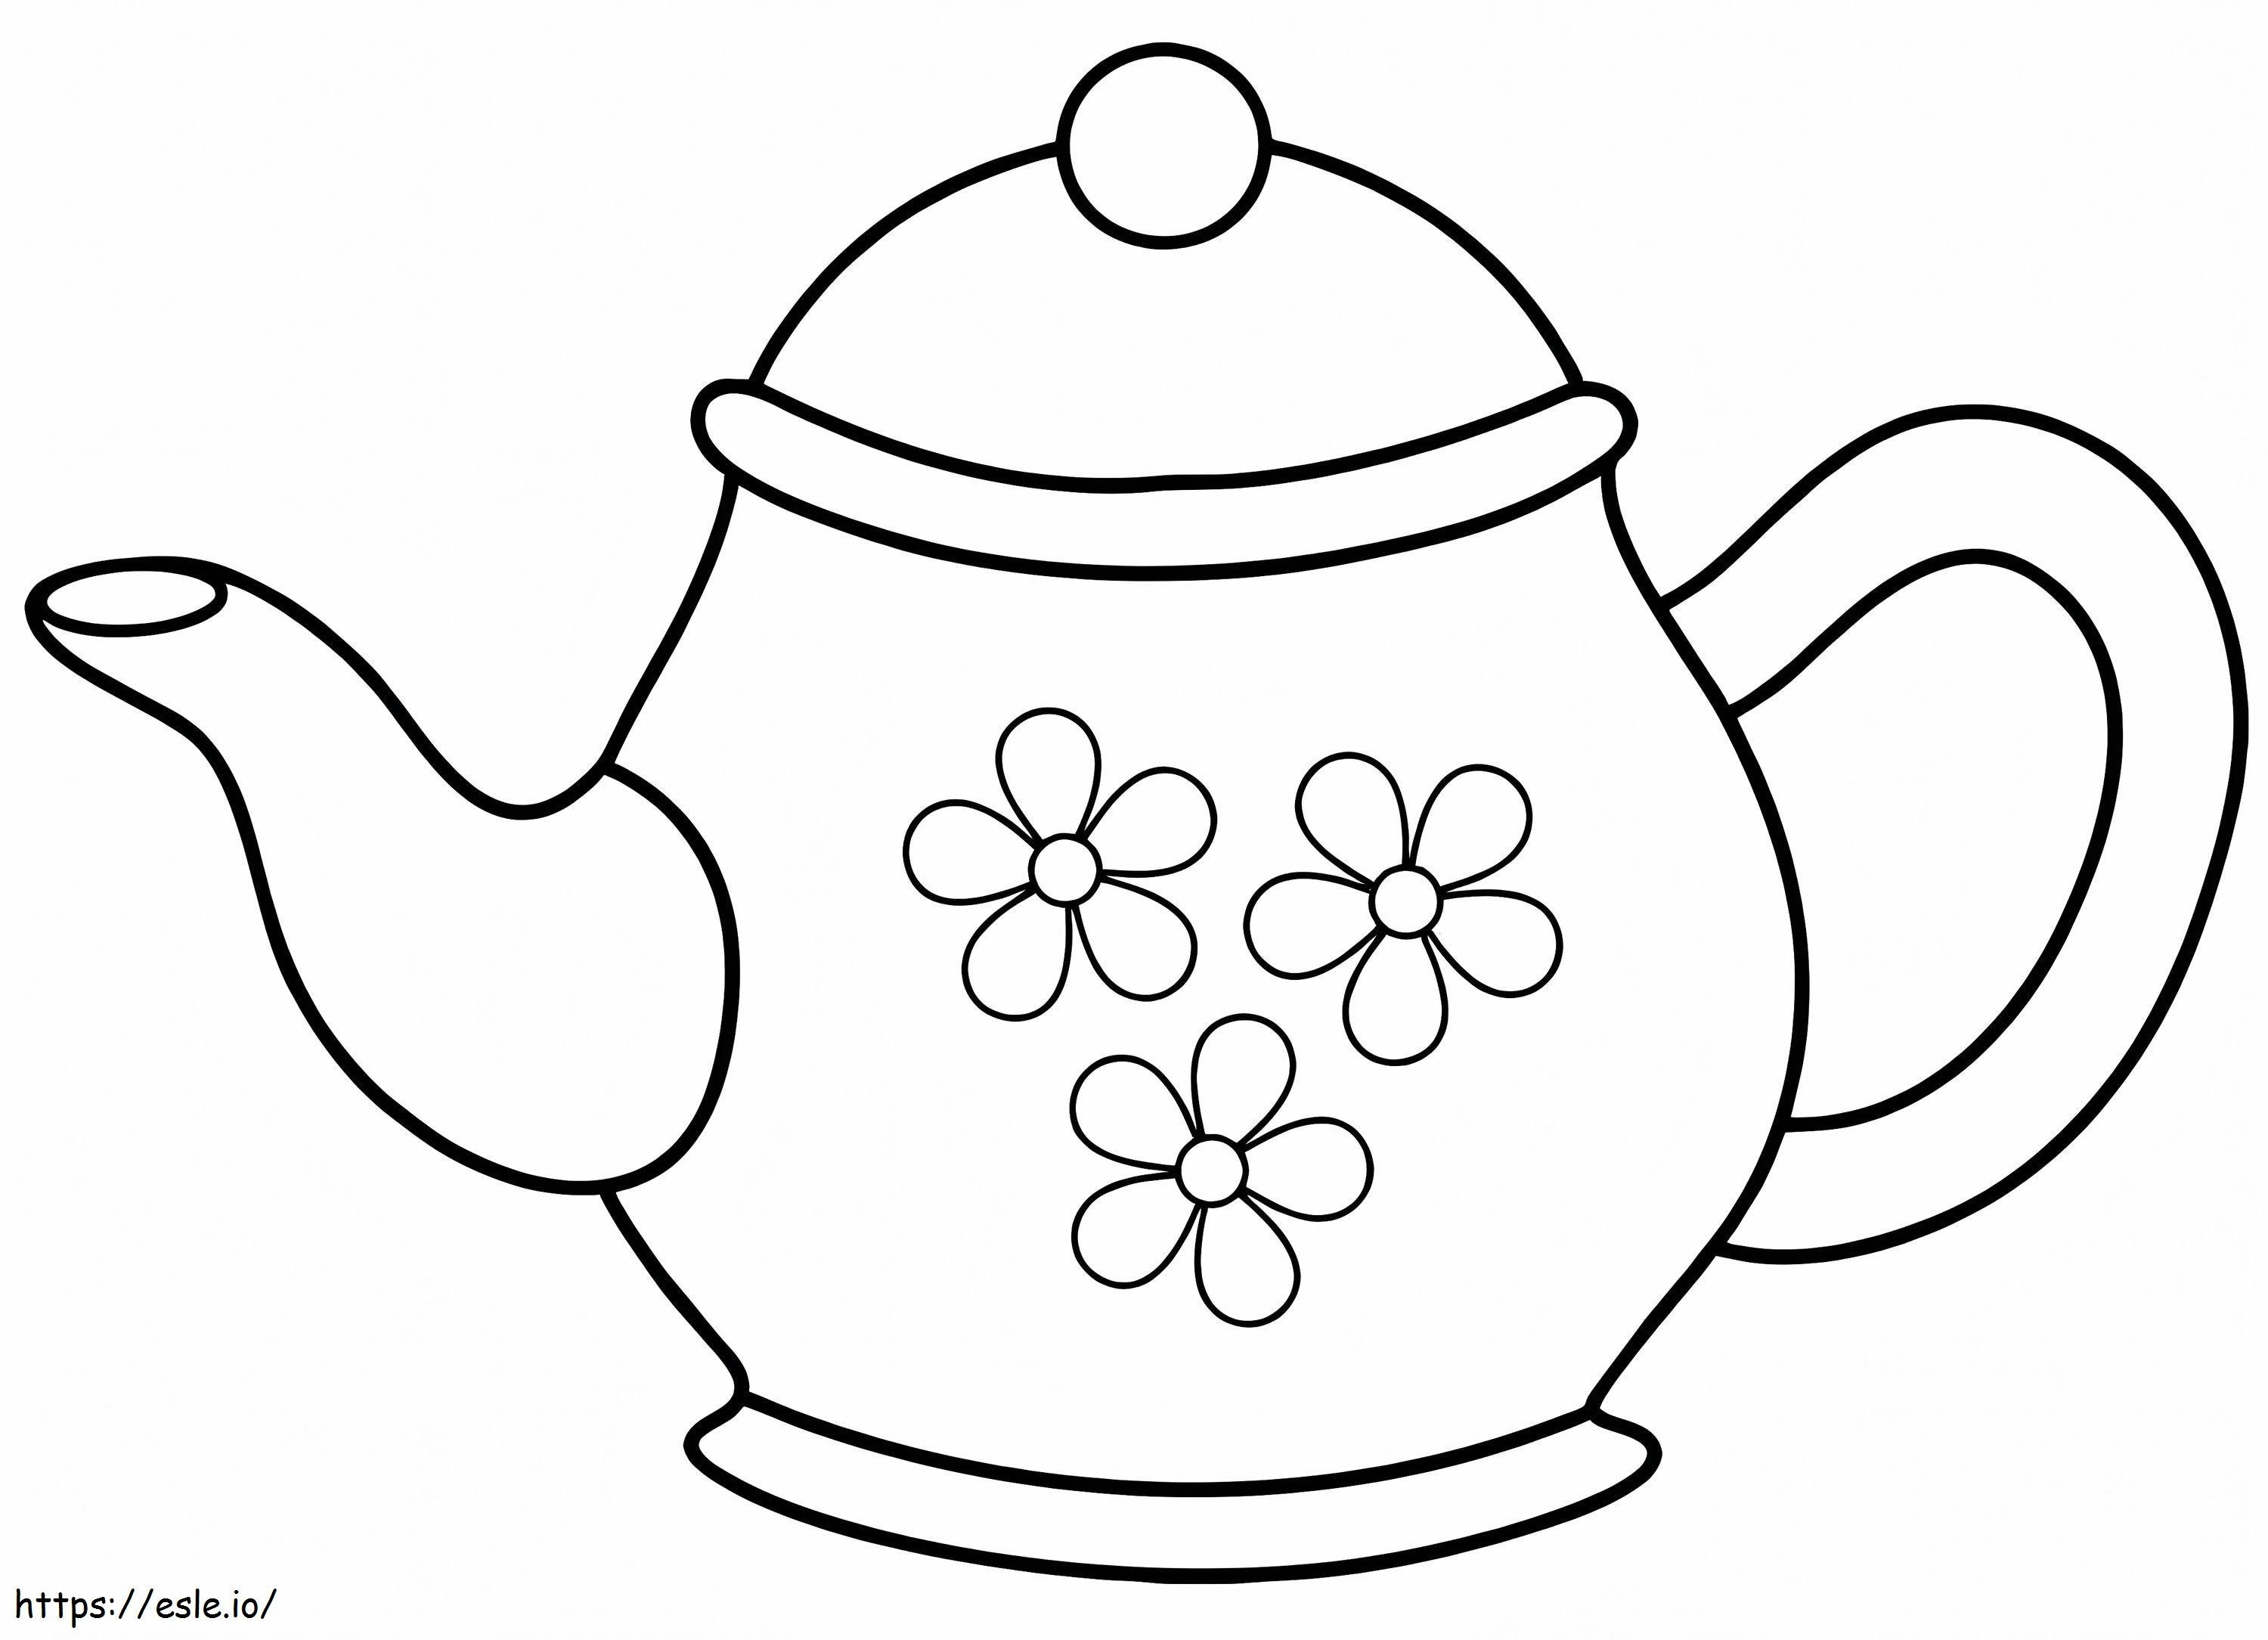 Teapot With Flowers coloring page